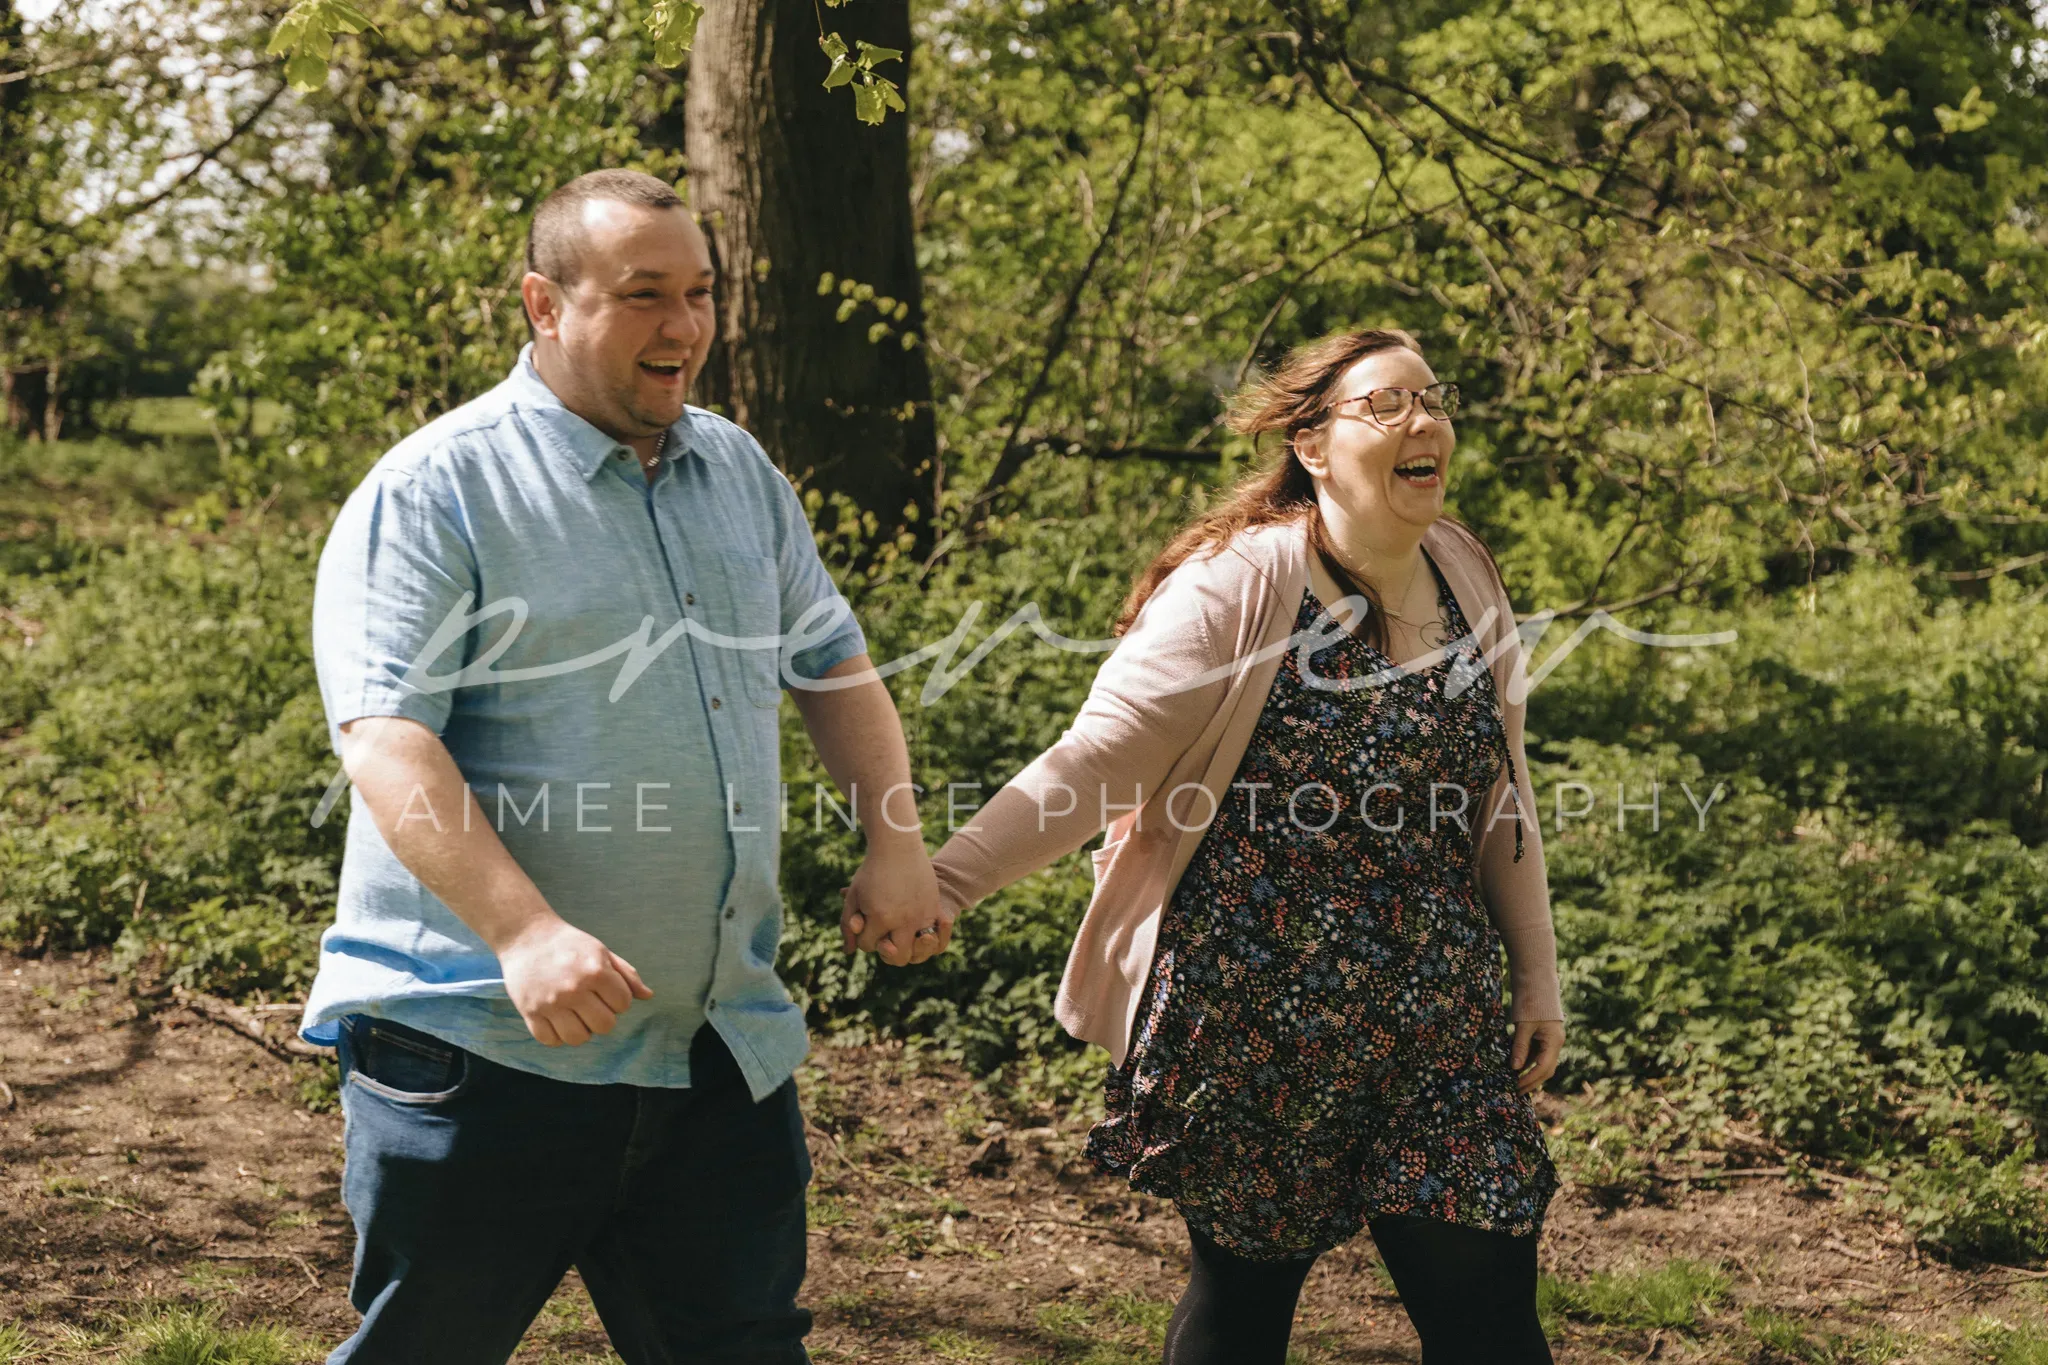 A joyful man and woman holding hands and running through a sunlit park. Both are laughing and dressed in casual spring attire. Trees with fresh green leaves and grassy areas are visible in the background.